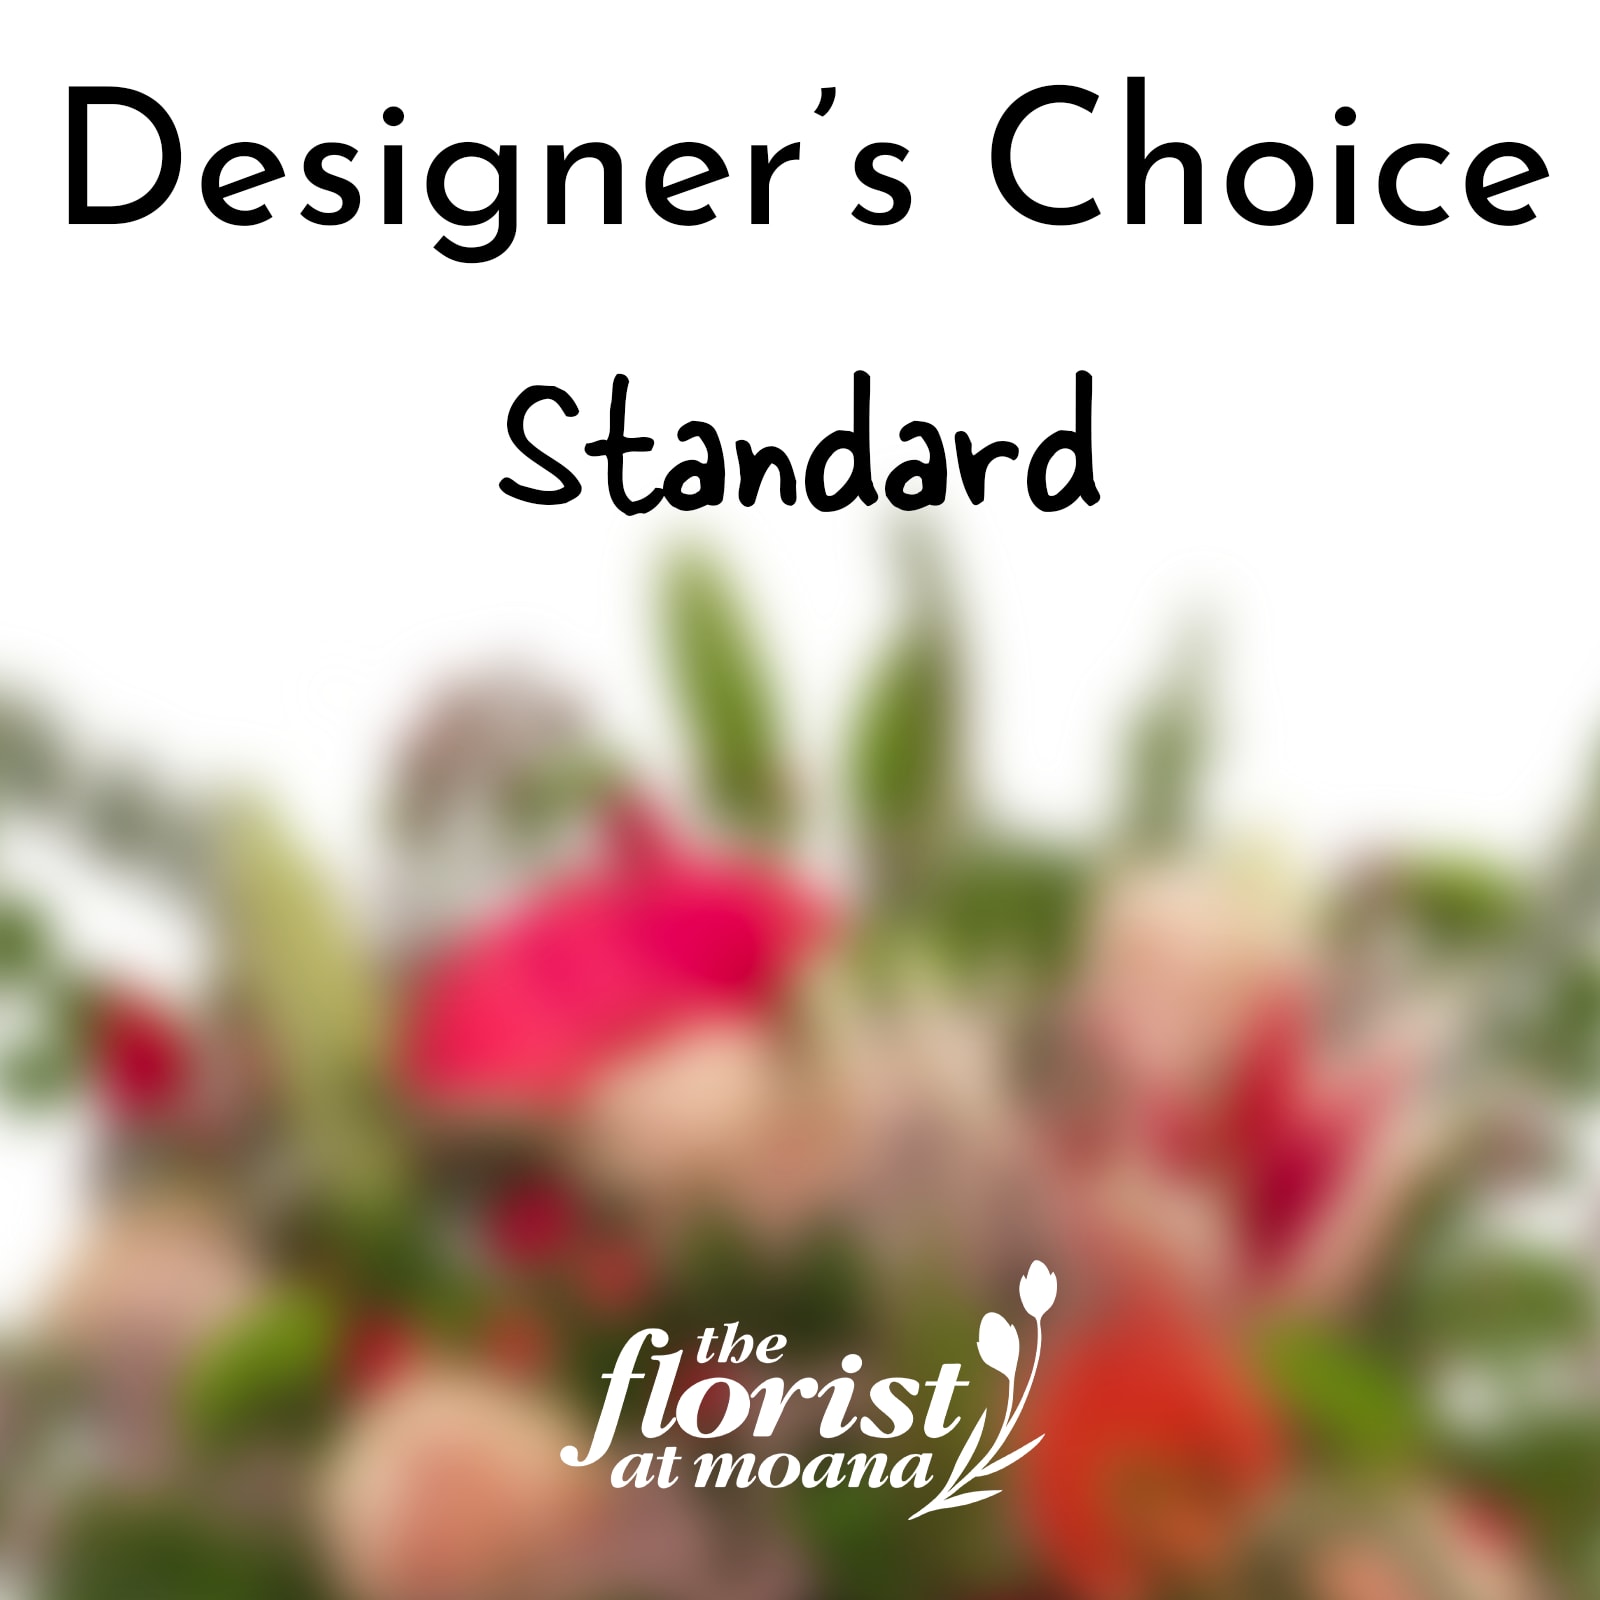 Designers Choice - A custom arrangement, designed specially for you, using our freshest, most beautiful flowers! Selections vary but quality is guaranteed. Special requests and substitutions may not be available. 